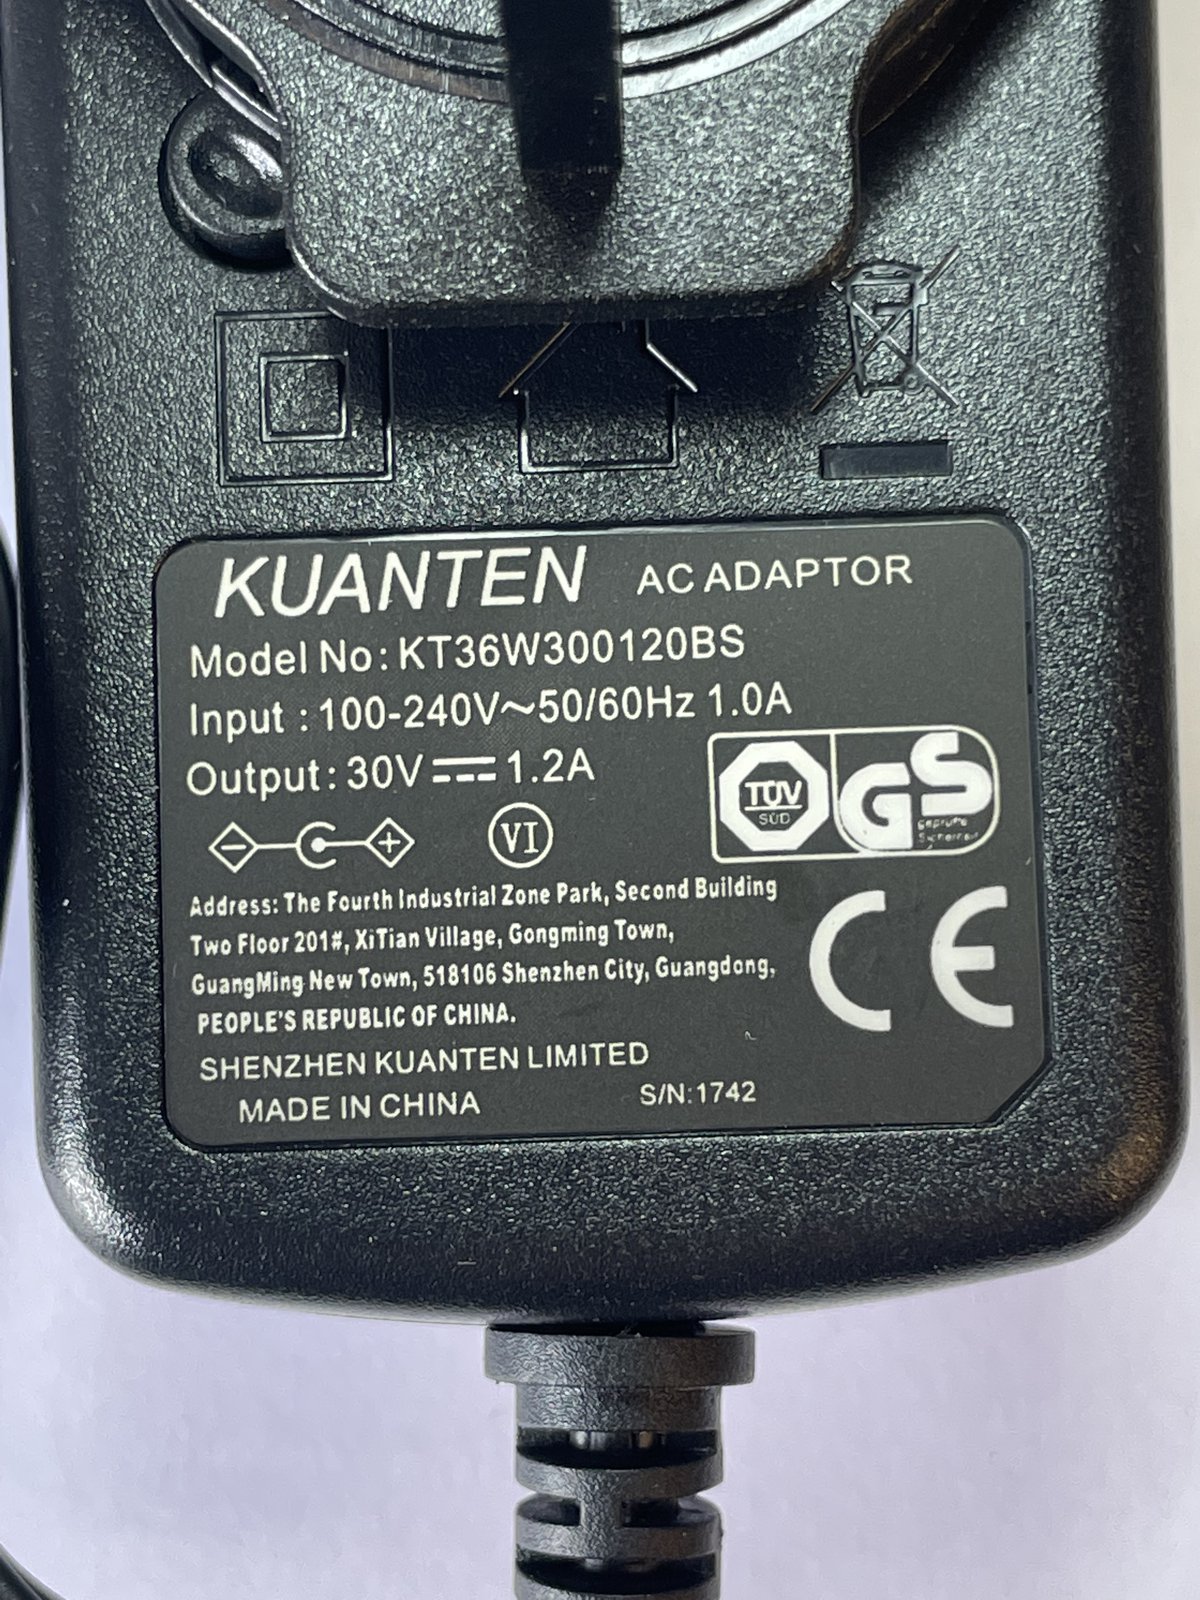 AC/DC Adapter Charger for AT&T ZTE MF279 Home Wireless Internet Base Router